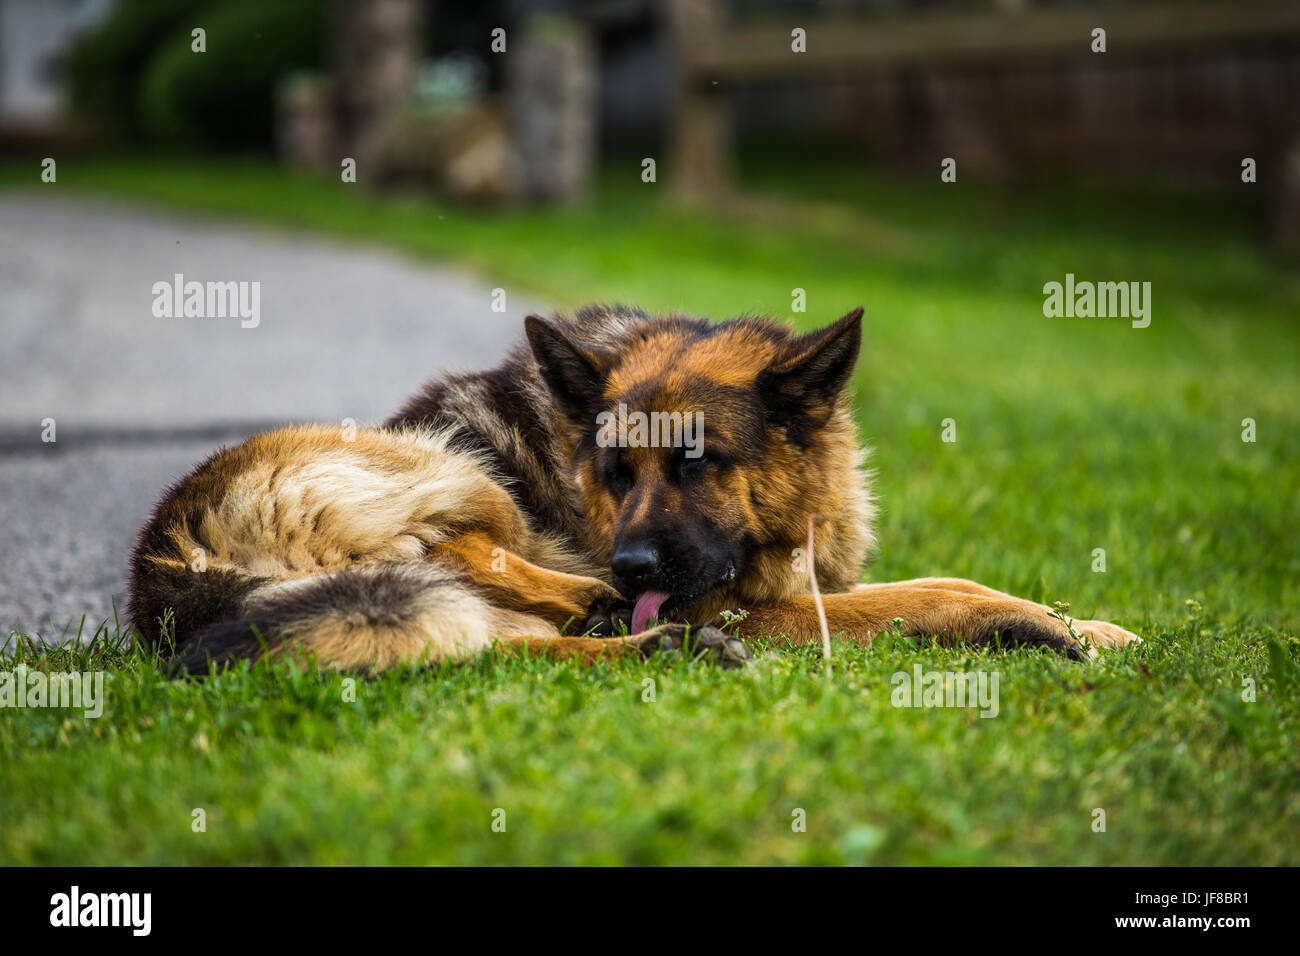 German Shepherd dog (Canis lupus familiaris) lying on the grass and licking its paw. Stock Photo